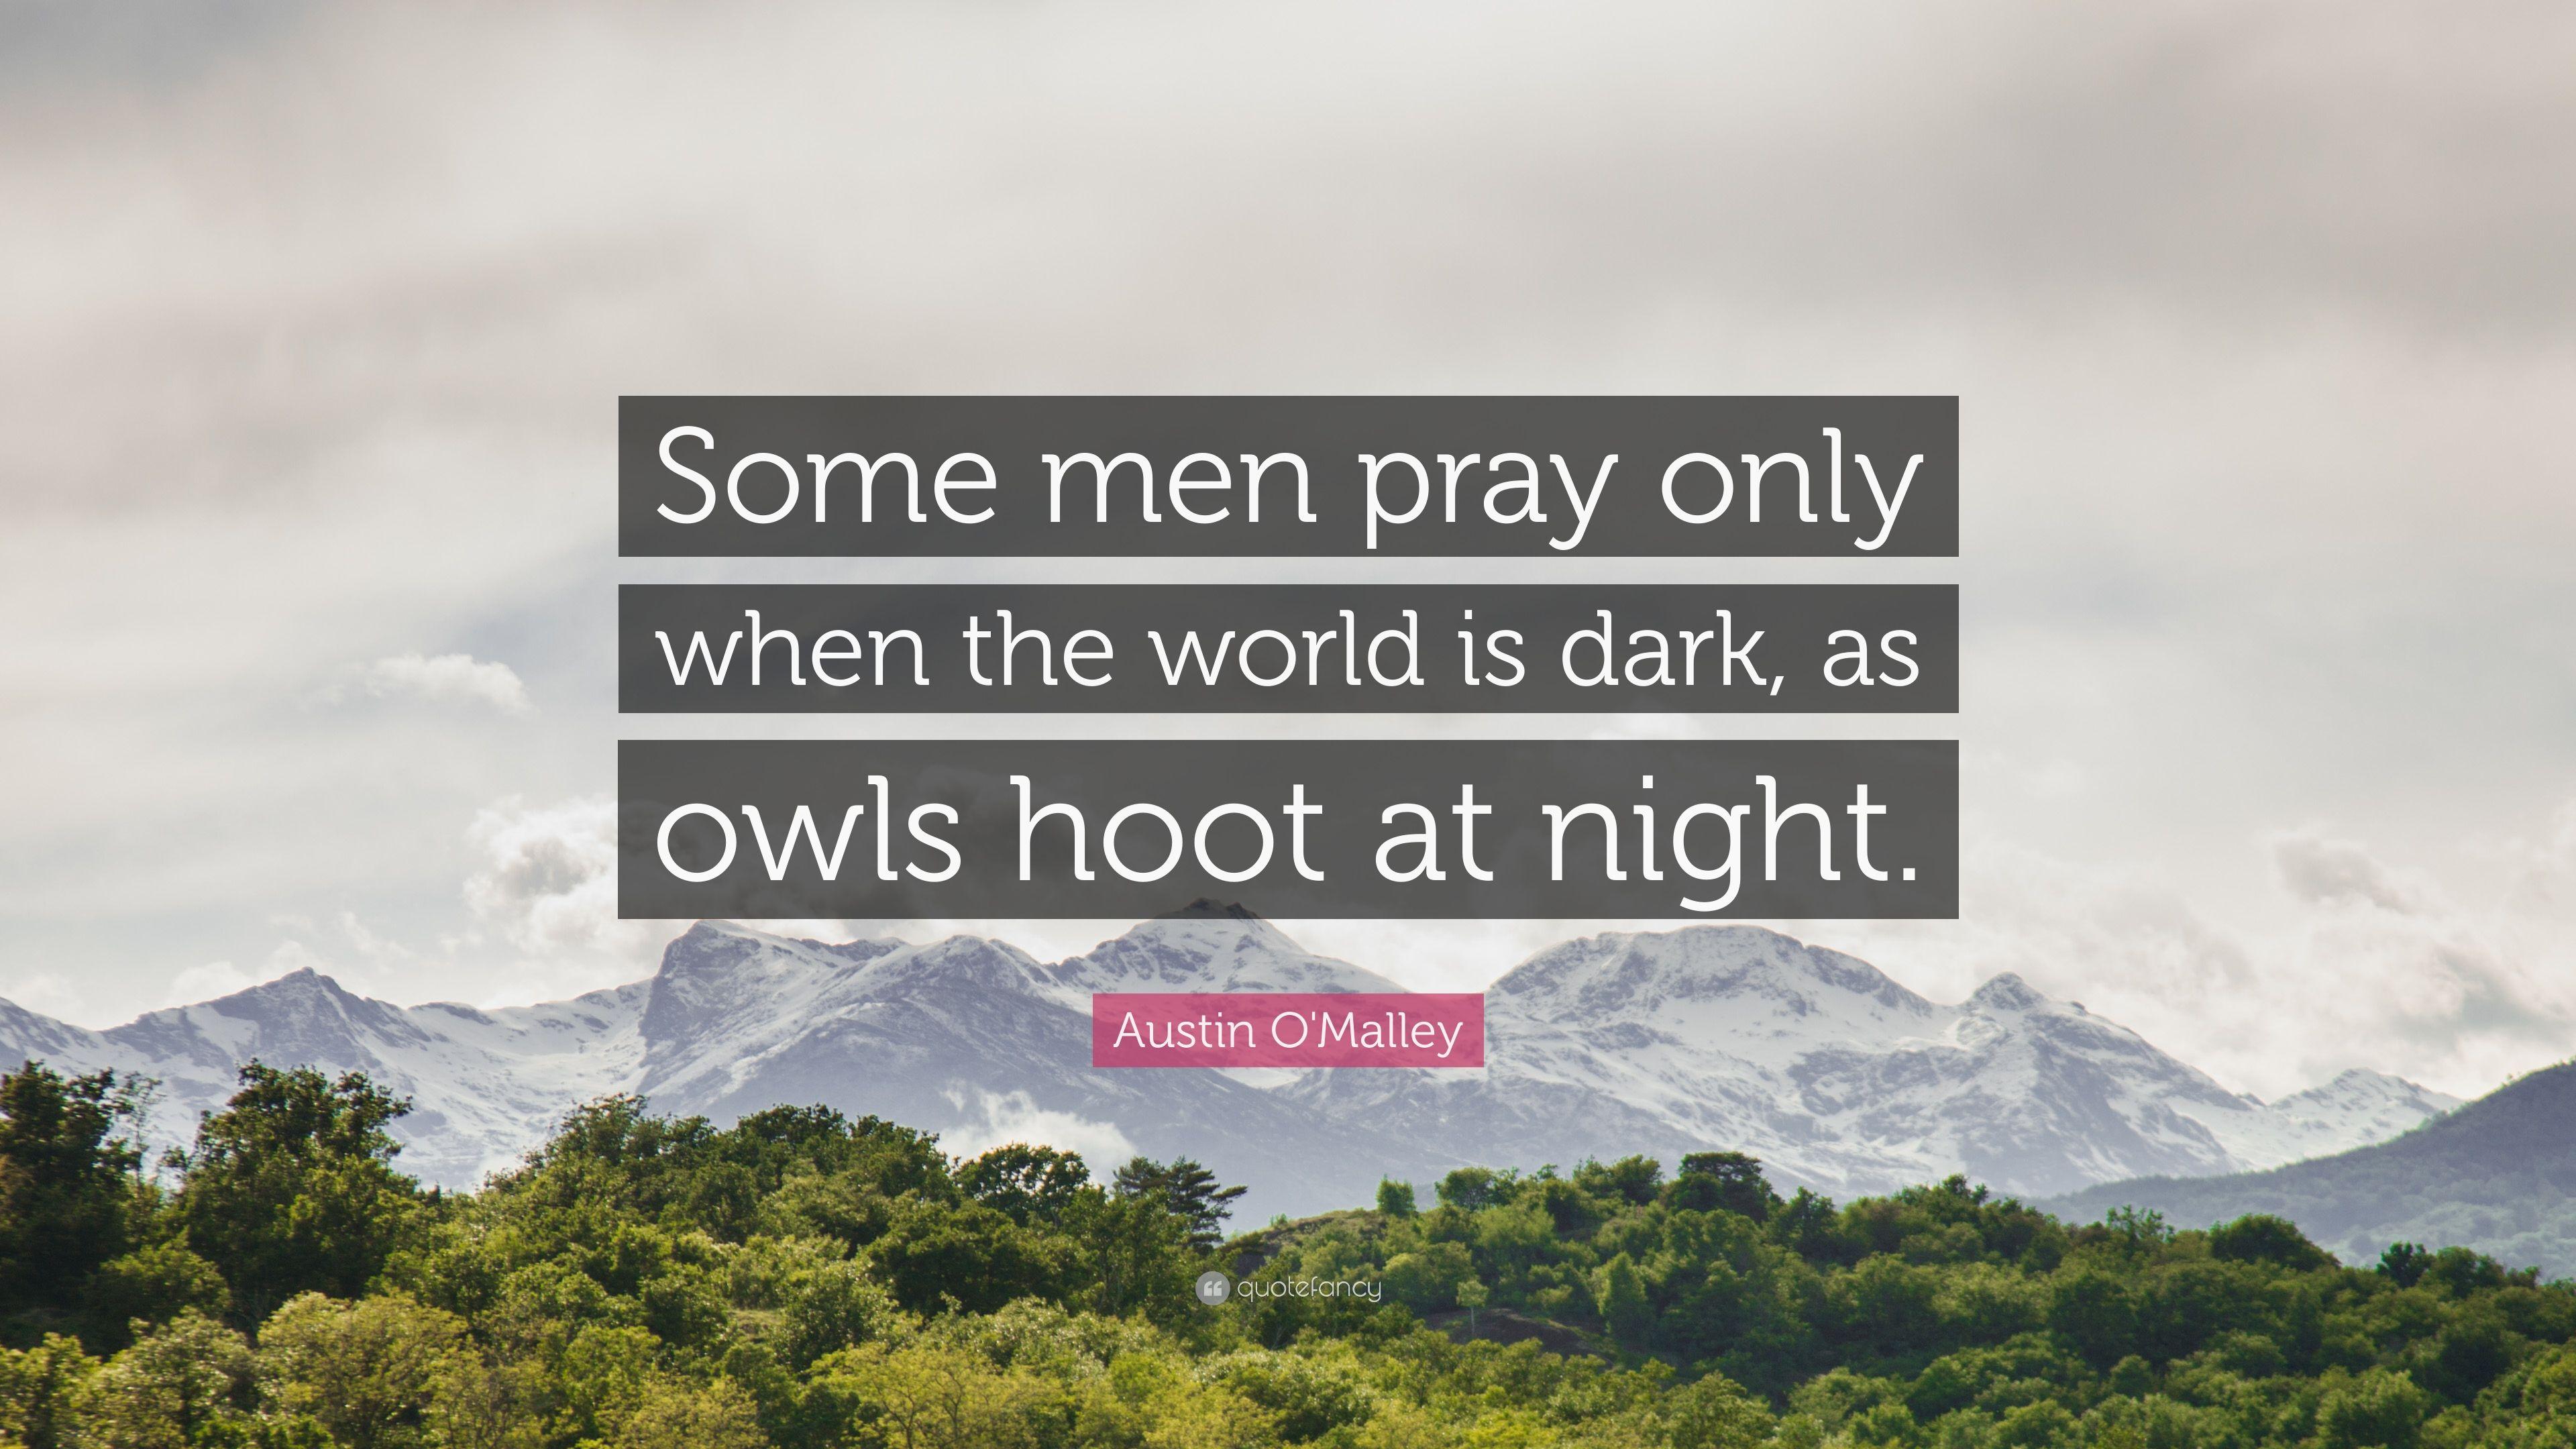 Austin O'Malley Quote: “Some men pray only when the world is dark